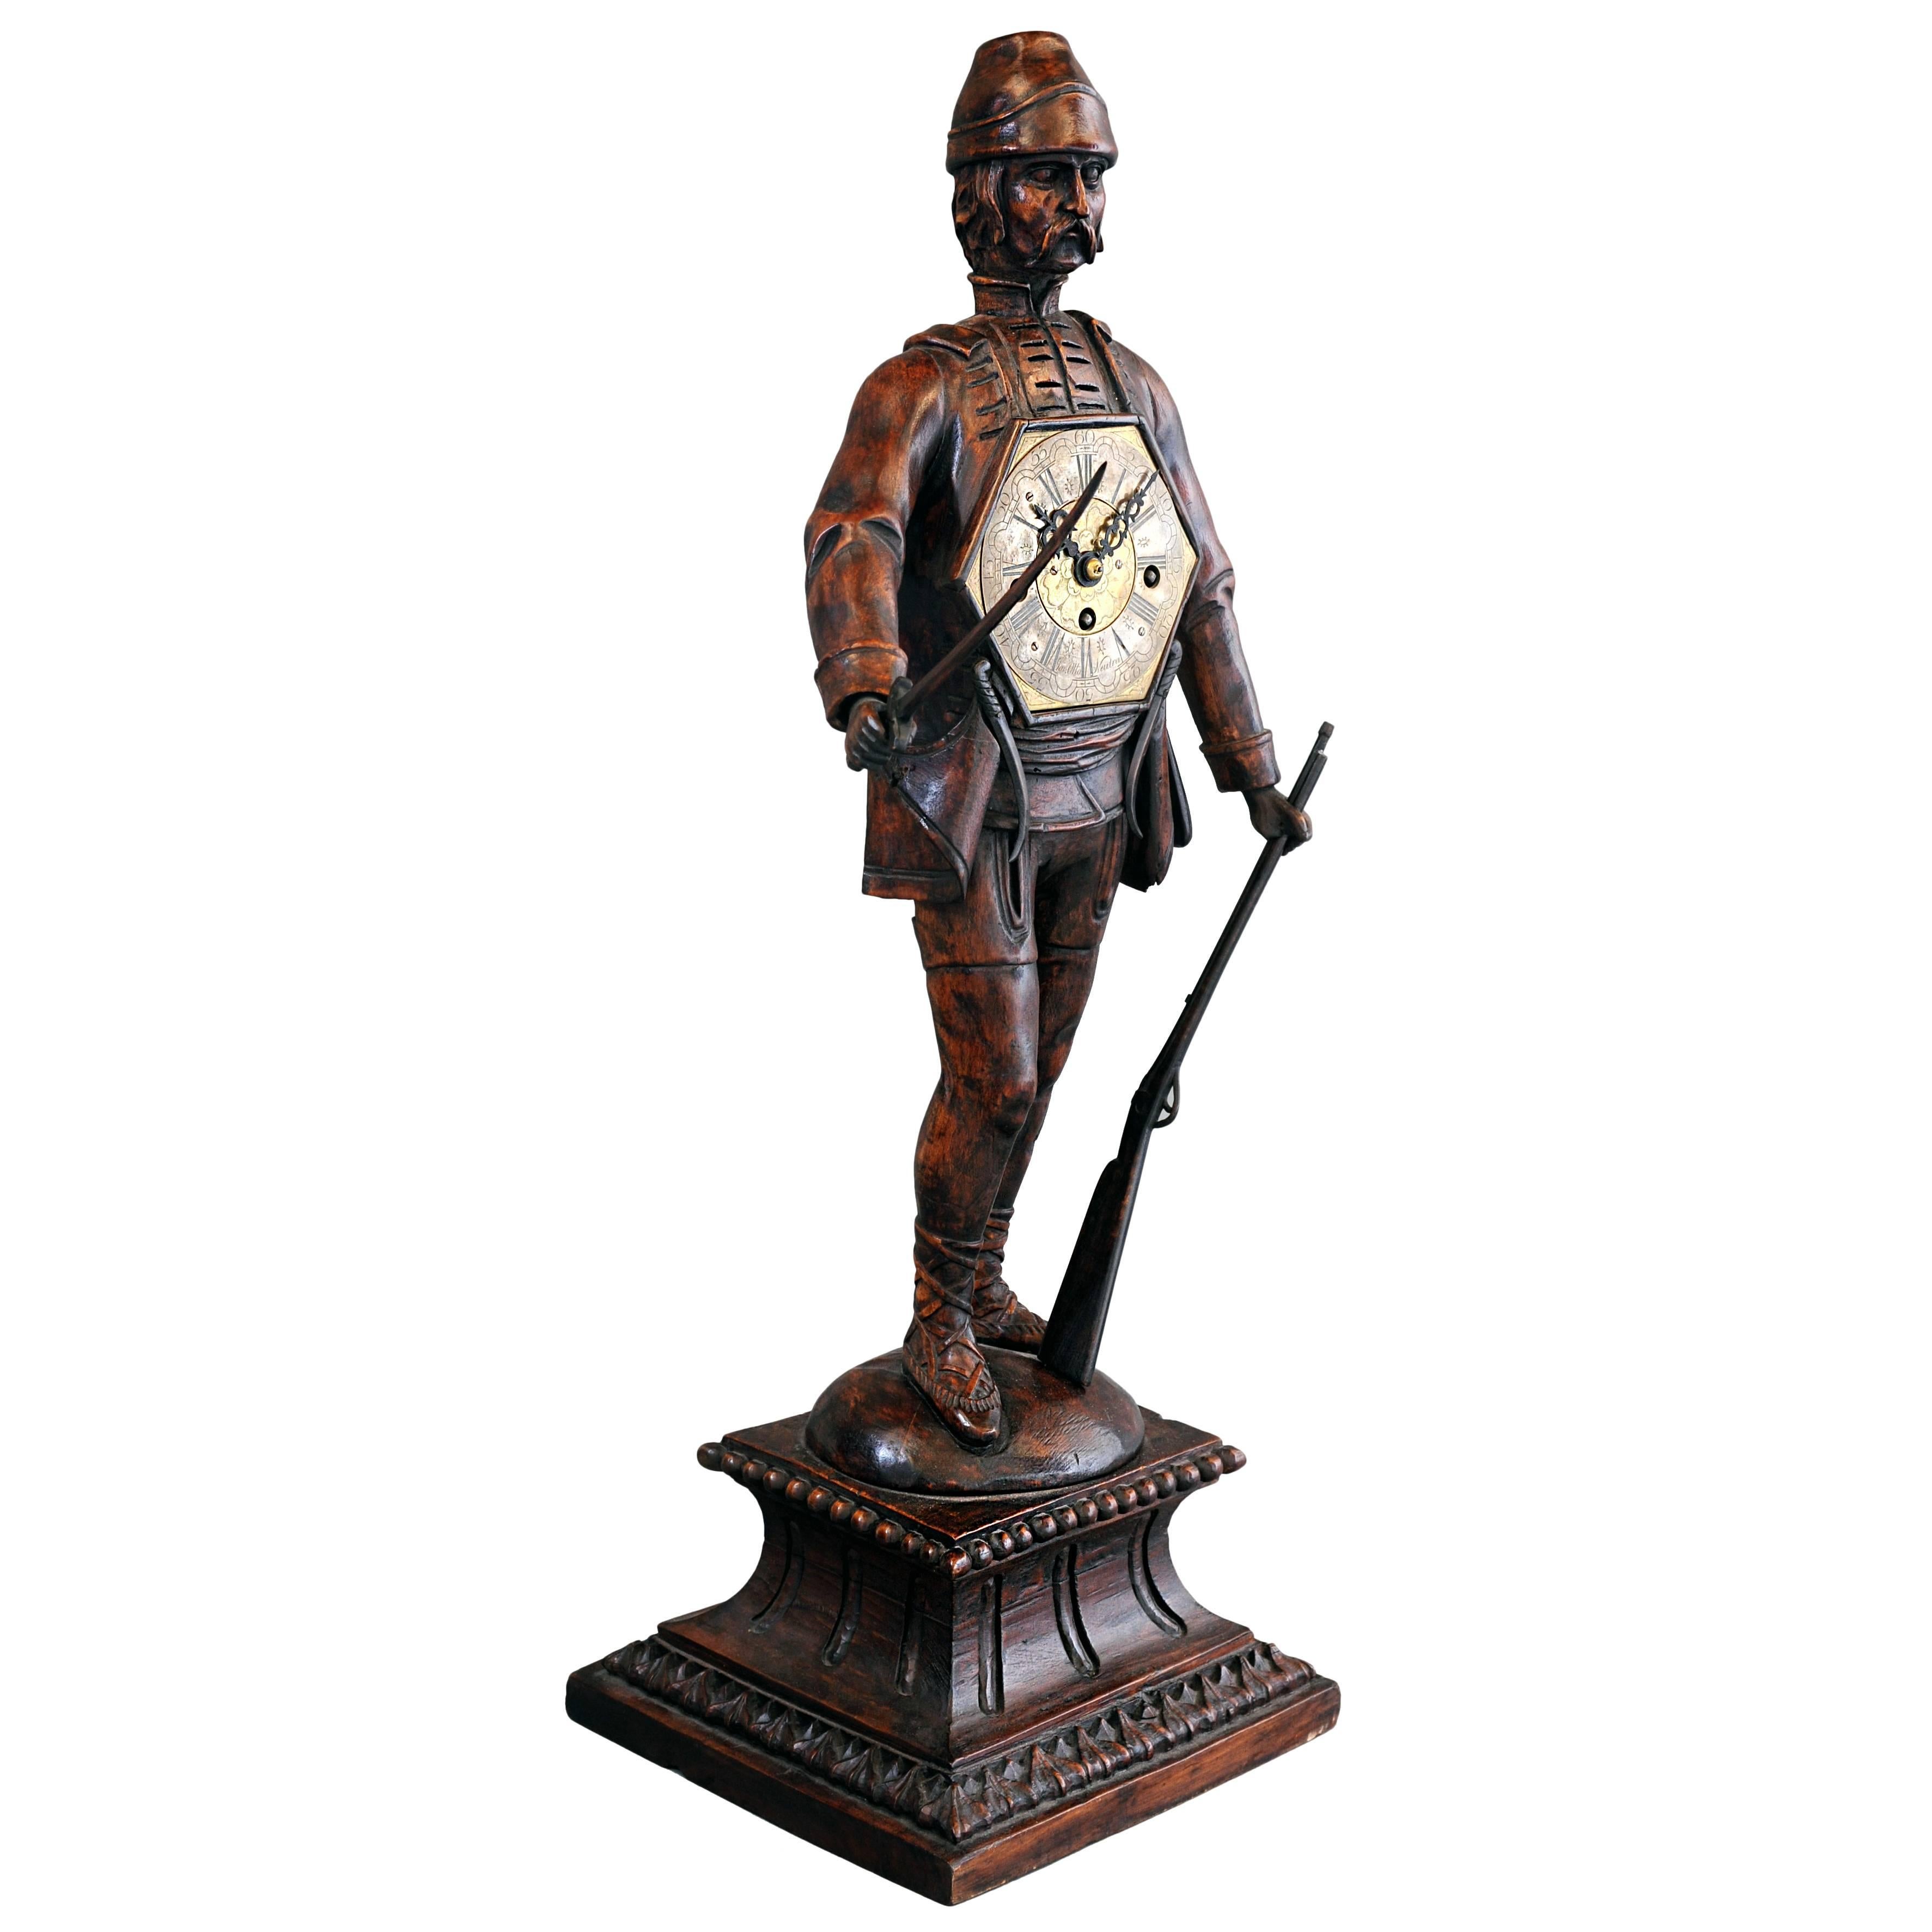 Imposing Untouched Central Europe Soldier Figure, circa 1780, Signed J.O.Neutra For Sale